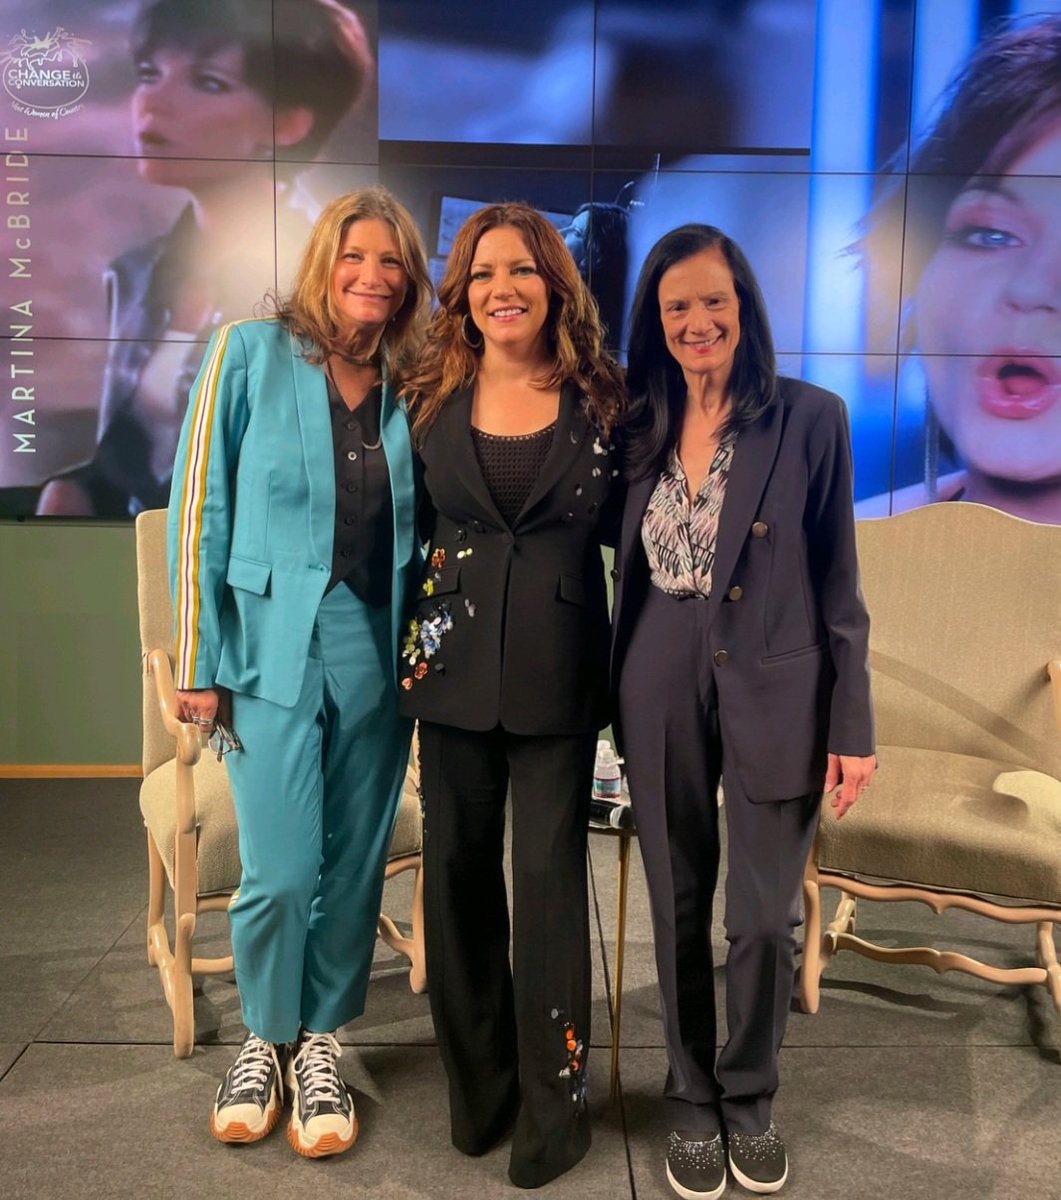 The perfect event after a month long celebration of Women's History Month inspired by @martinamcbride ❤️ 'A Conversation With Martina McBride with @changetheconvo Co-Founder @TracyGershon!  Thanks to our sponsors @MediaRow @changeagentcy @bmi @RegionsBank @CMT